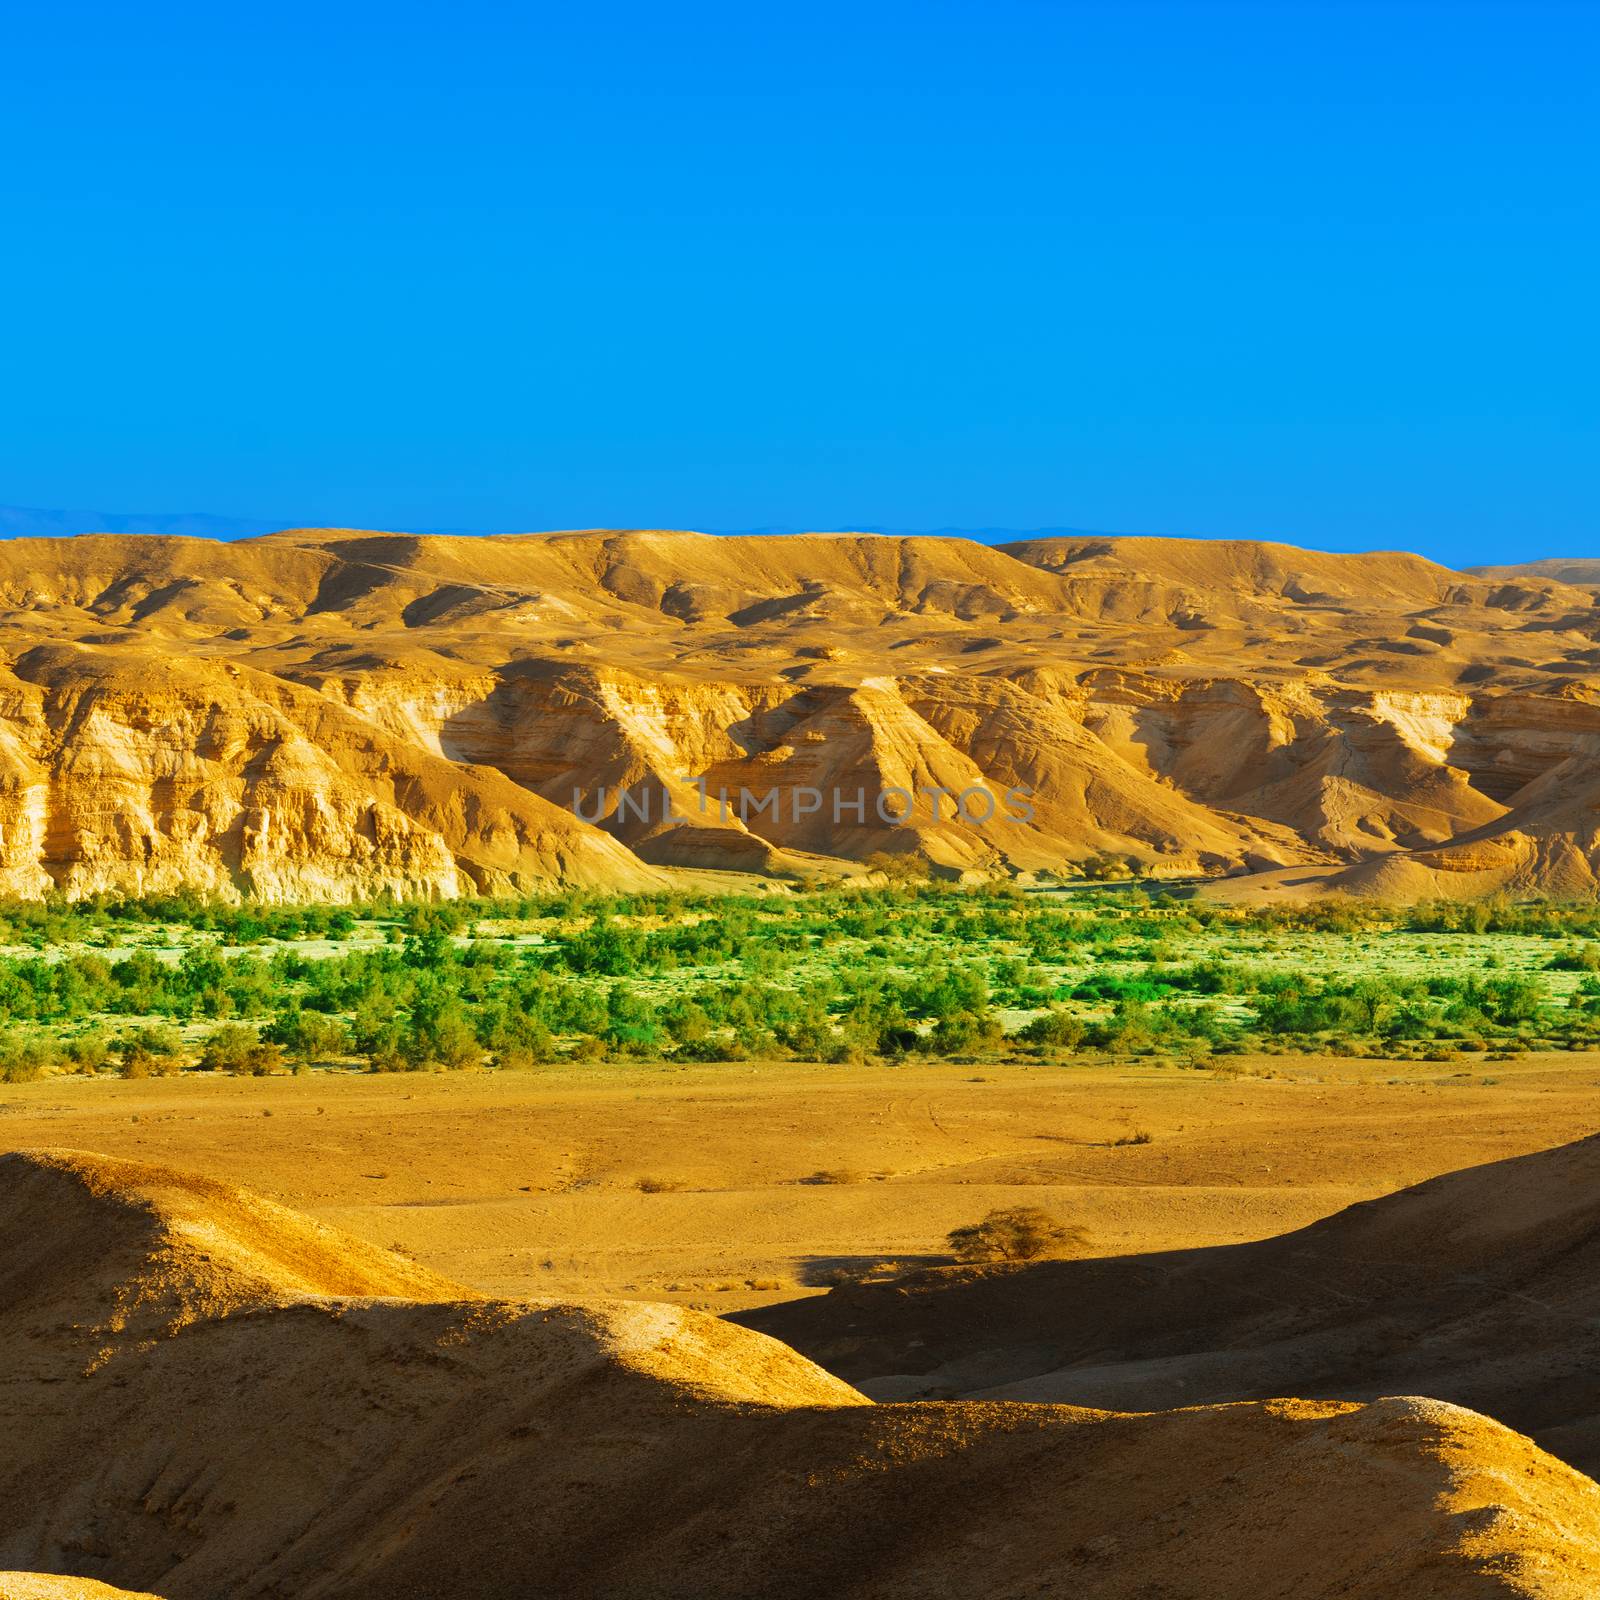 Green Plants and Rocky Hills of the Negev Desert in Israel